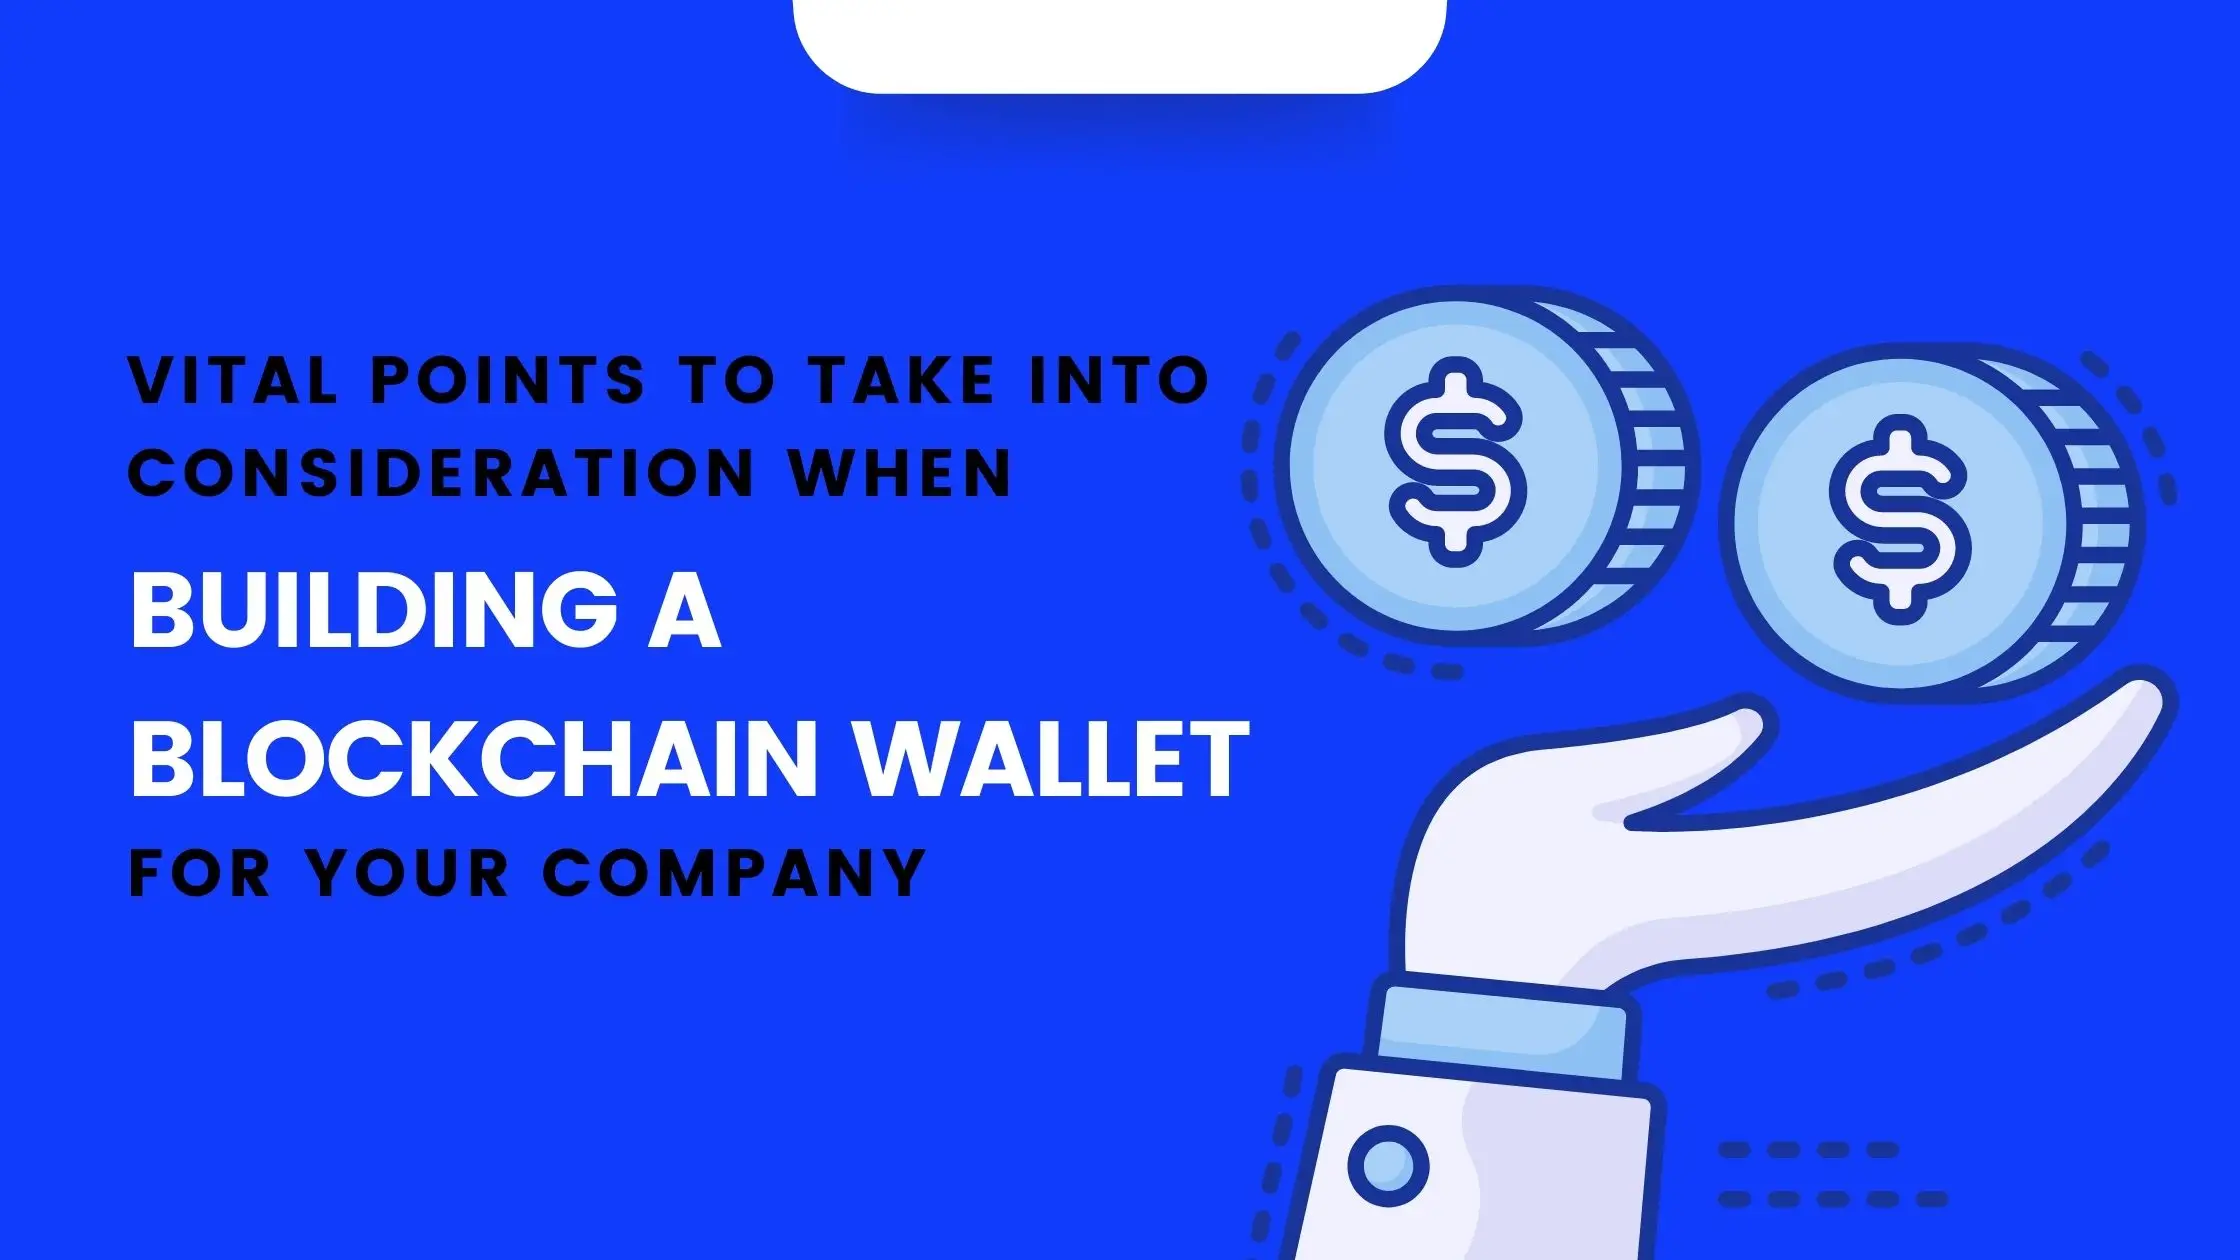 Vital points to take into consideration when building a blockchain wallet for your company